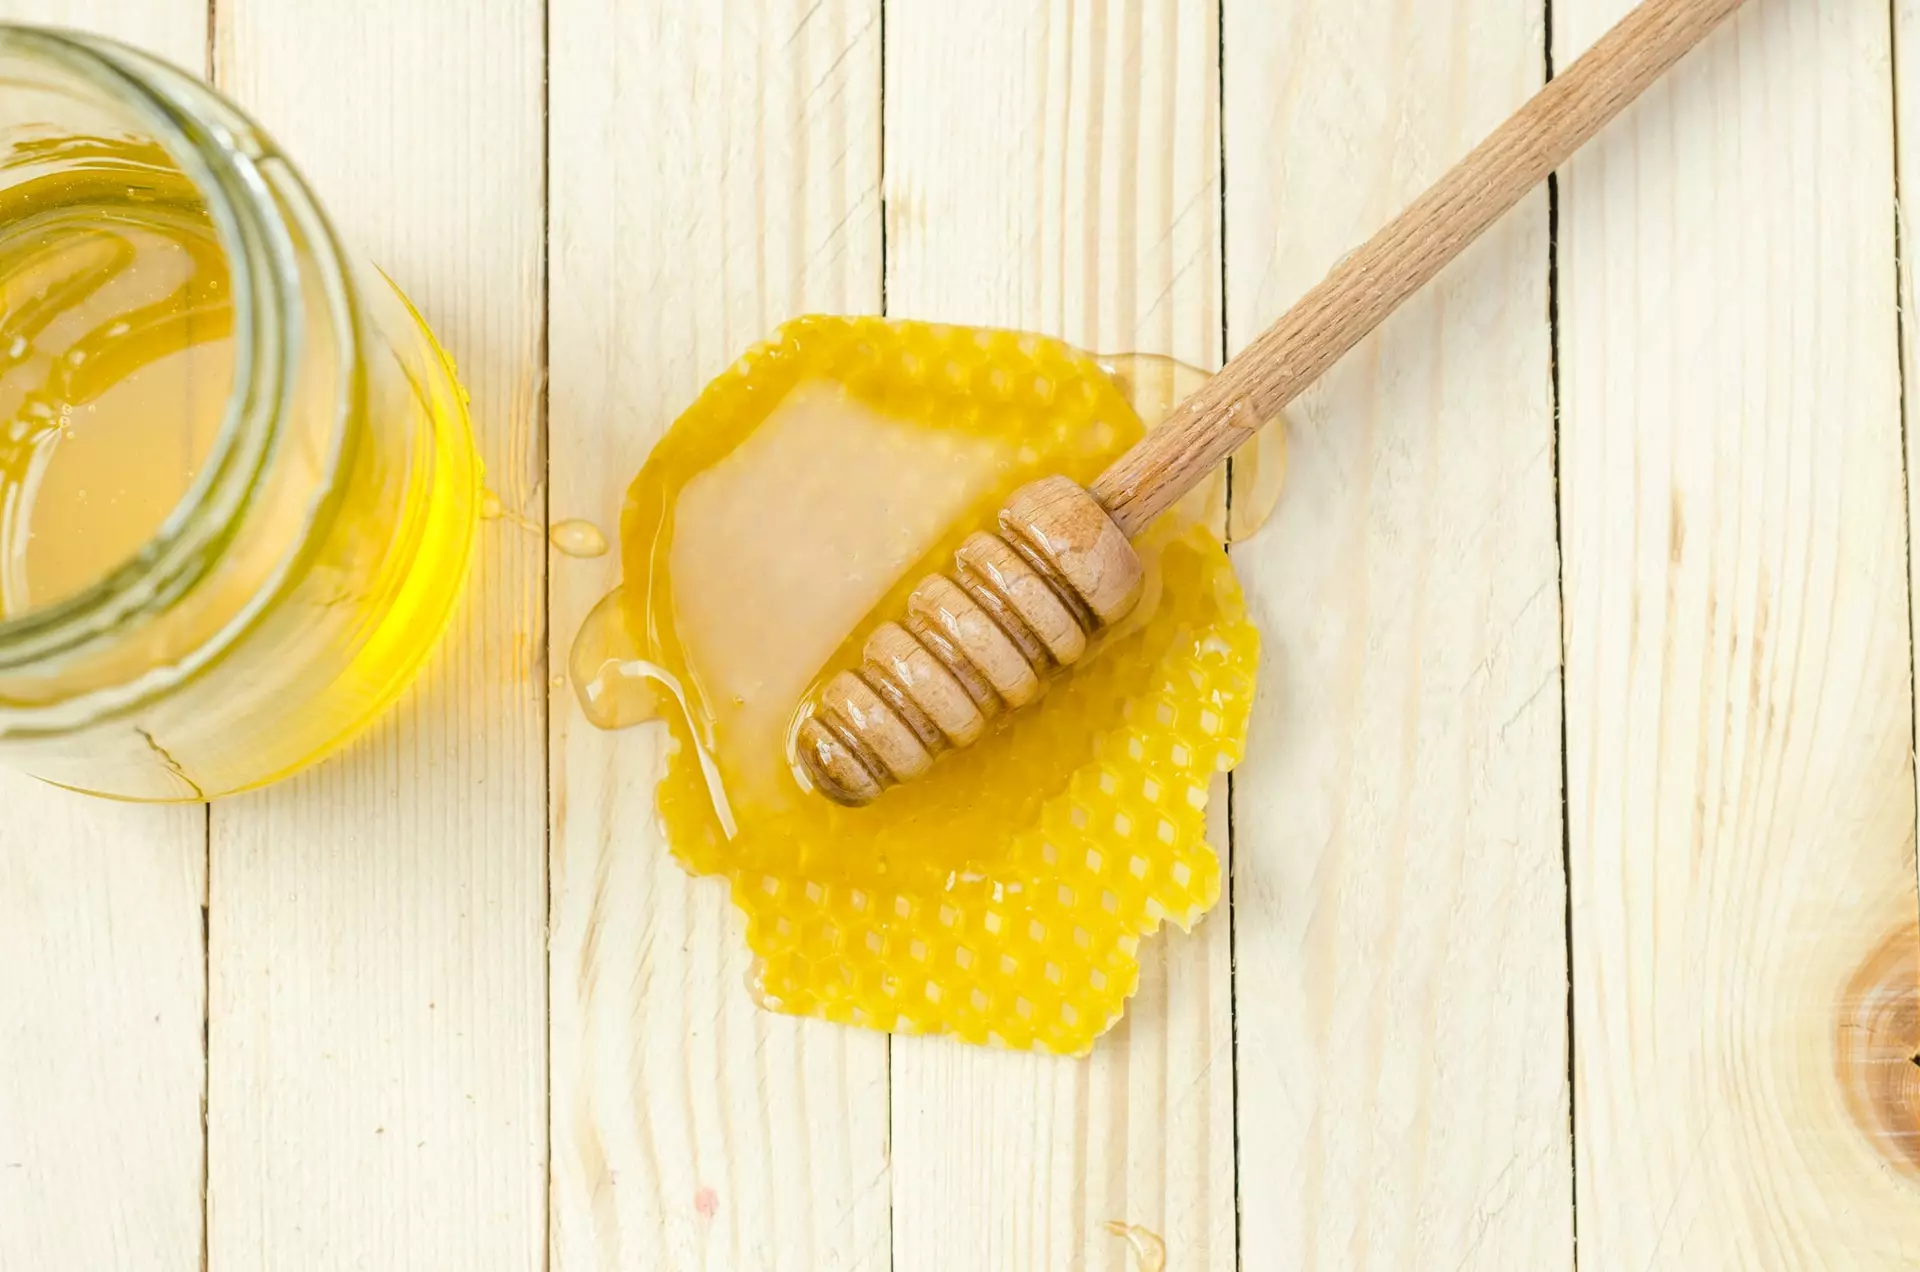 Is honey healthy? How to make sure you don't get stung